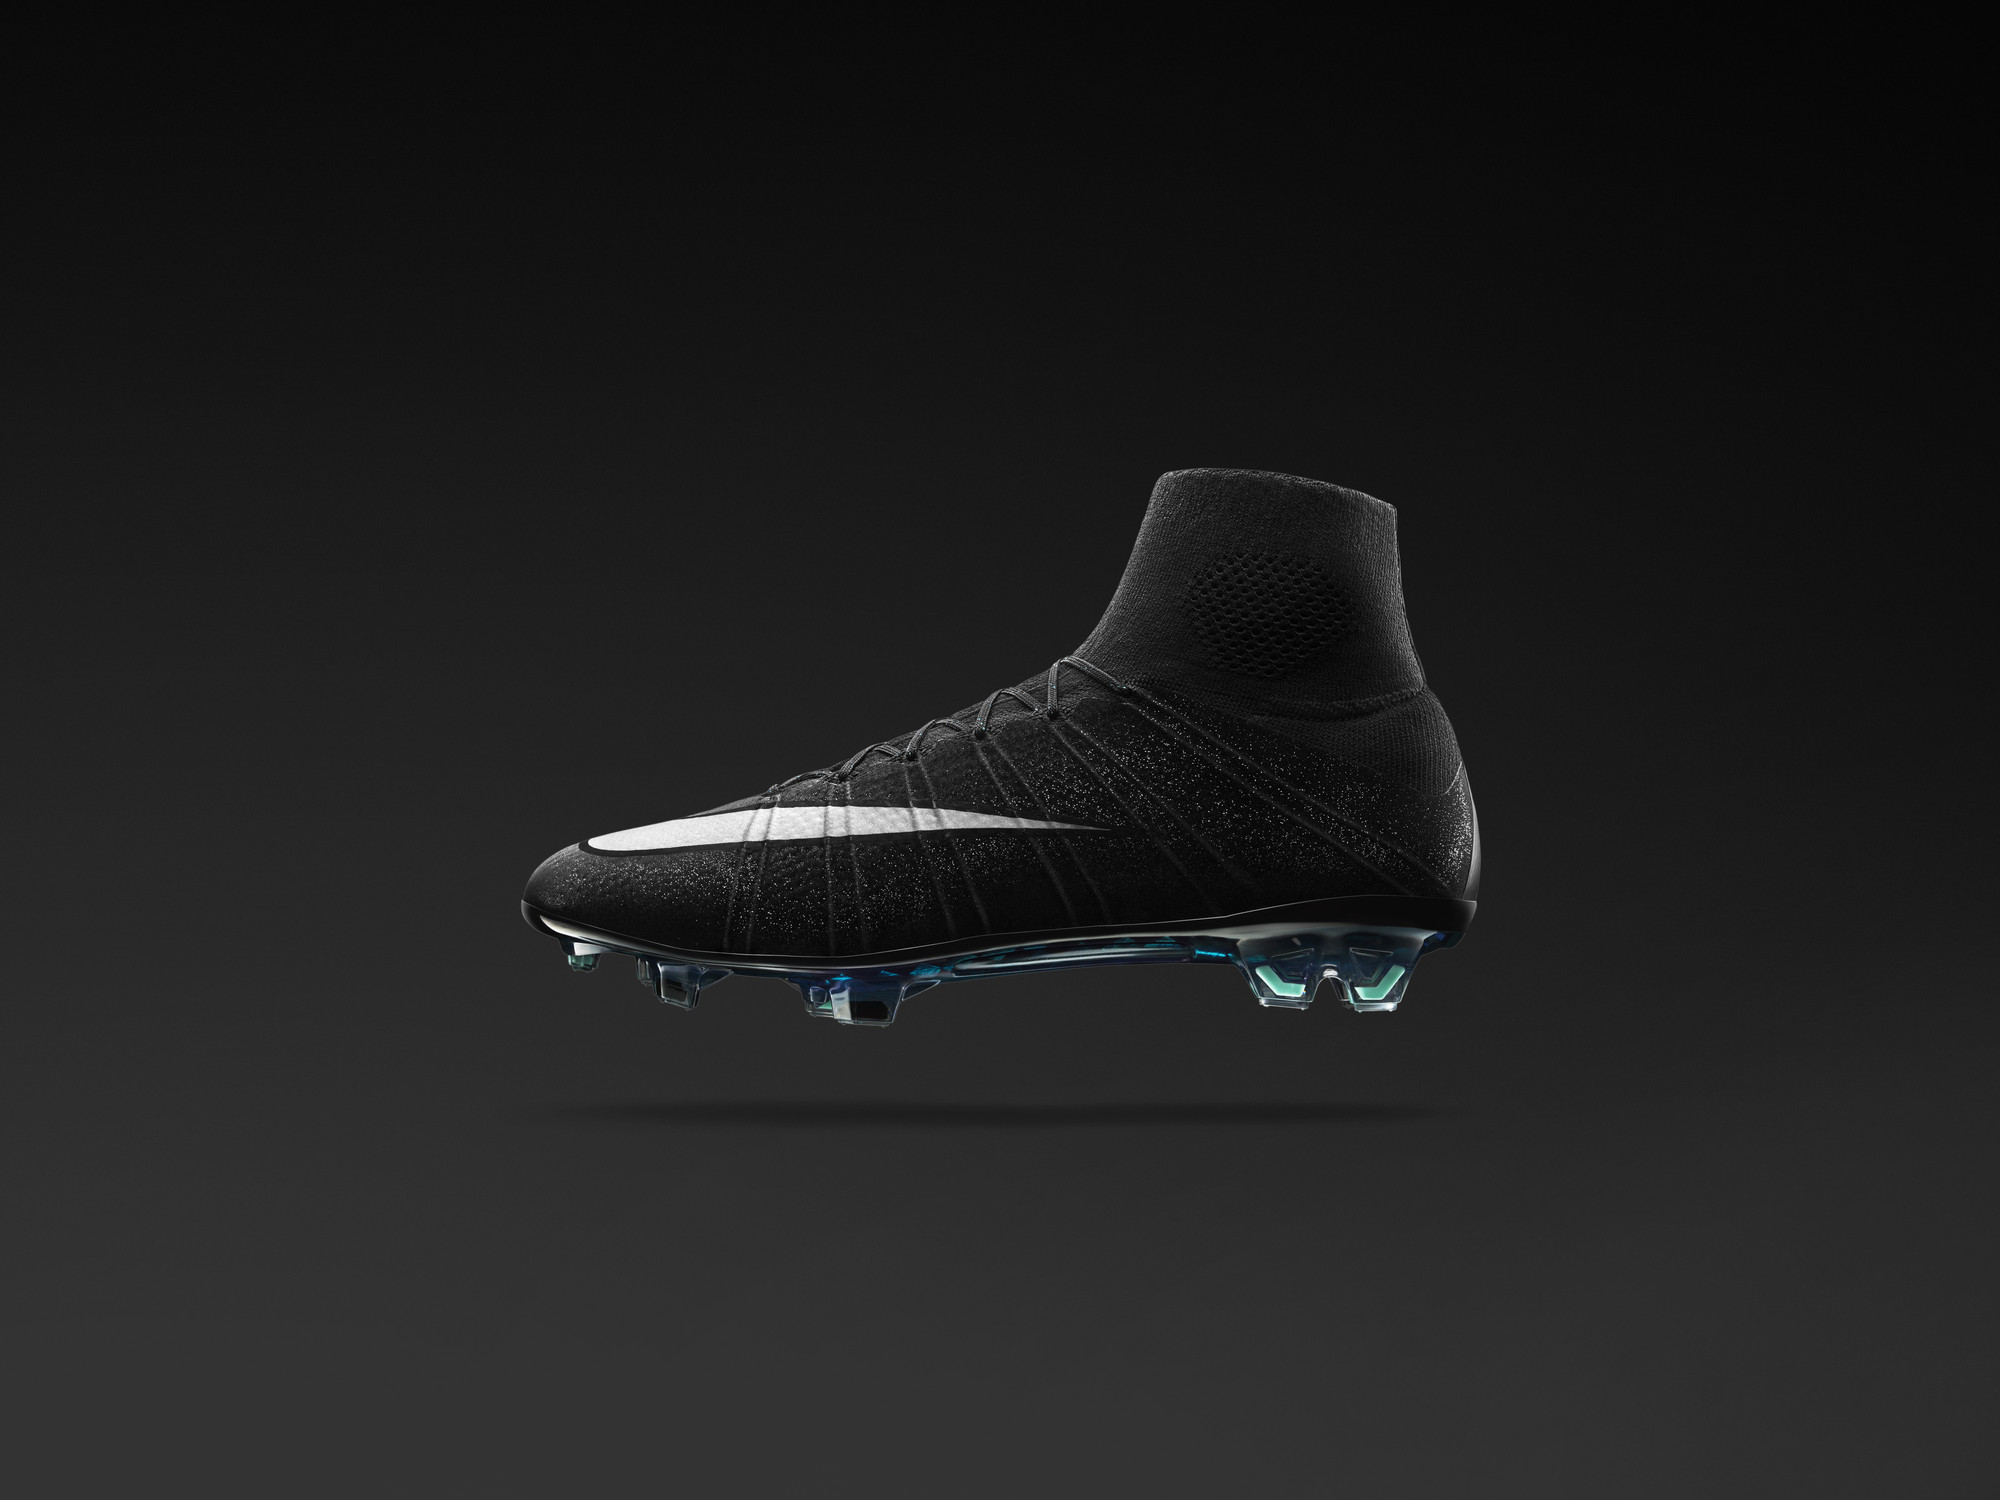 THE NIKE MERCURIAL SUPERFLY 6 AND VAPOR 12 ARE.